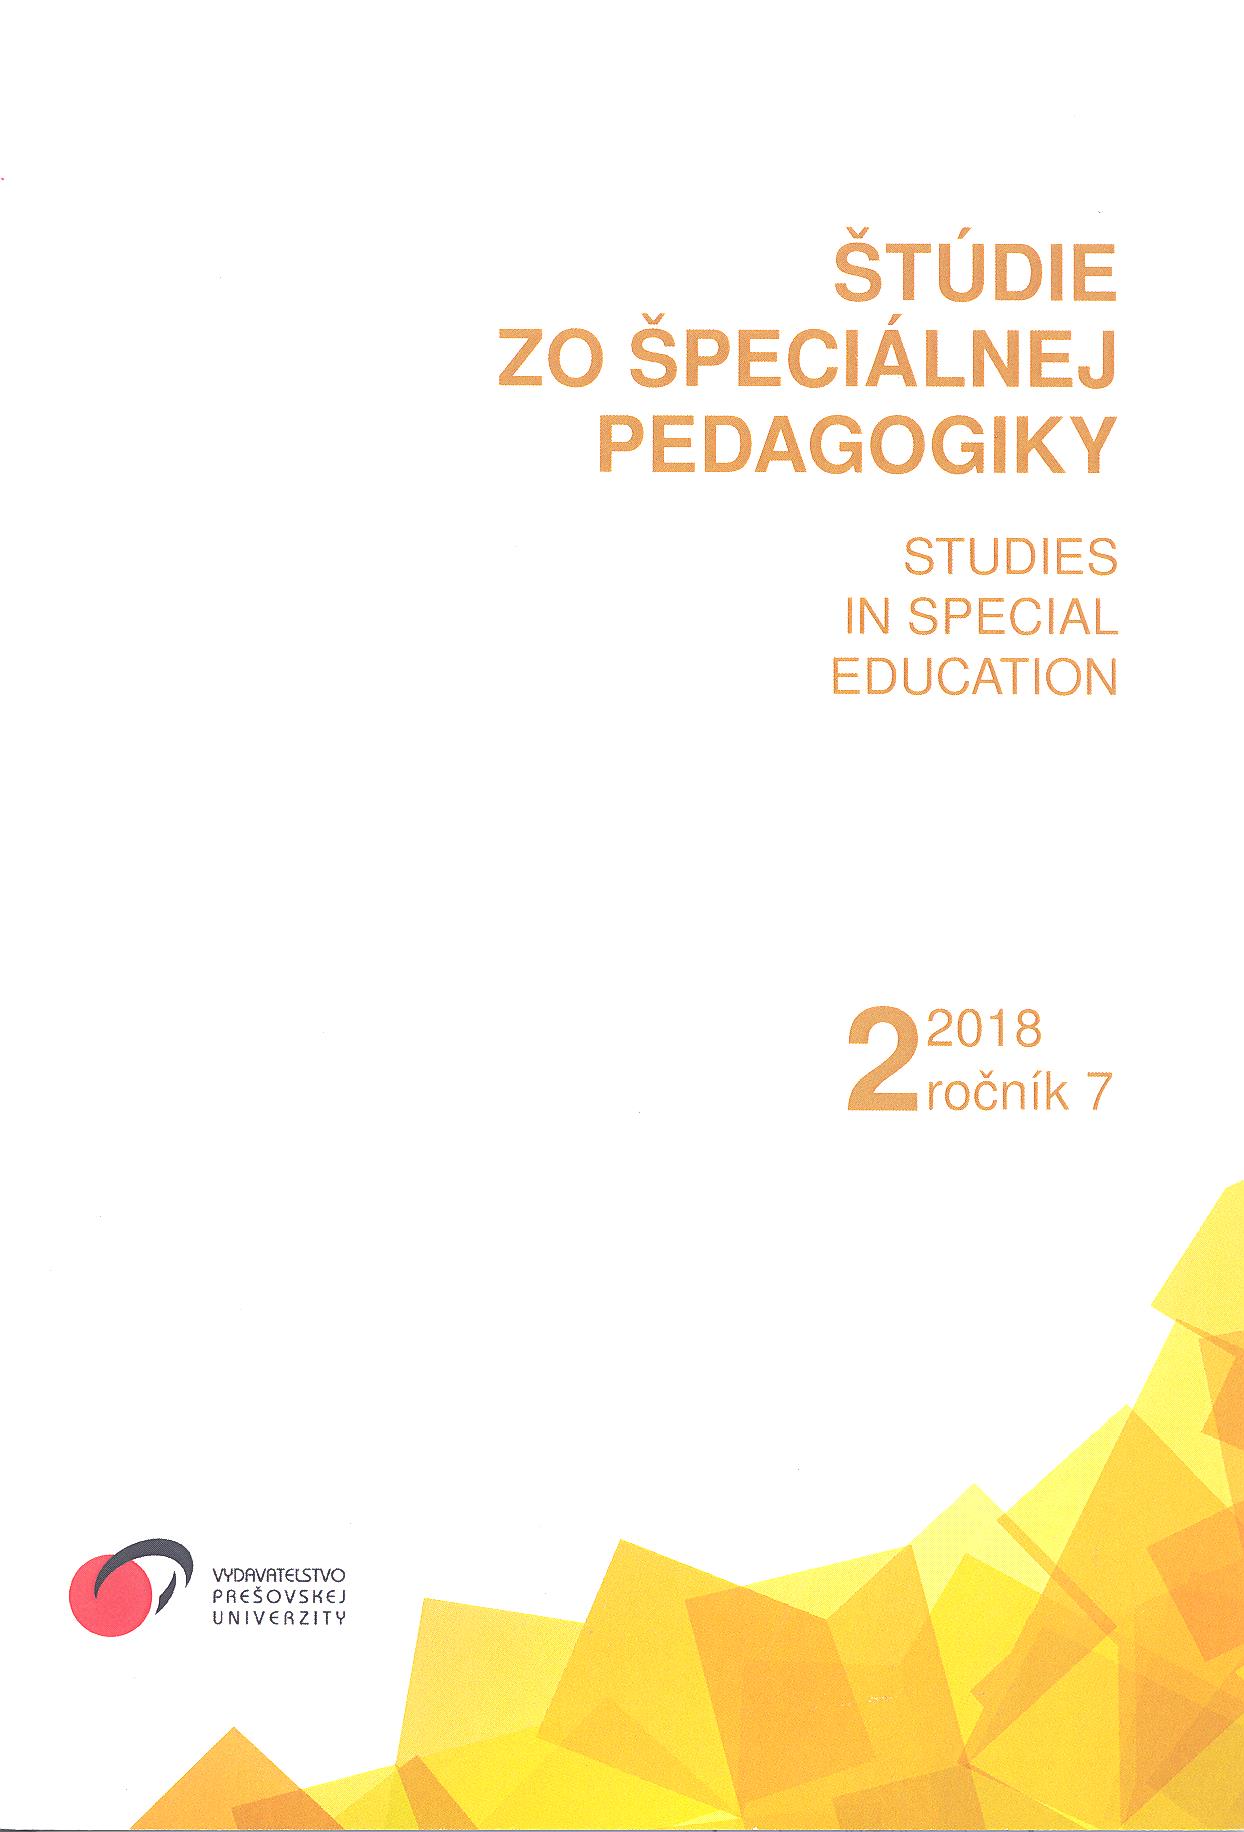 DUBAYOVÁ, T., KOŽÁROVÁ, J.: Coping strategies of pupils with special educational needs in inclusion and their relation to school. Brno: Tribun EU, 2018. 84 p. ISBN 978-80-263-1422-6. Cover Image